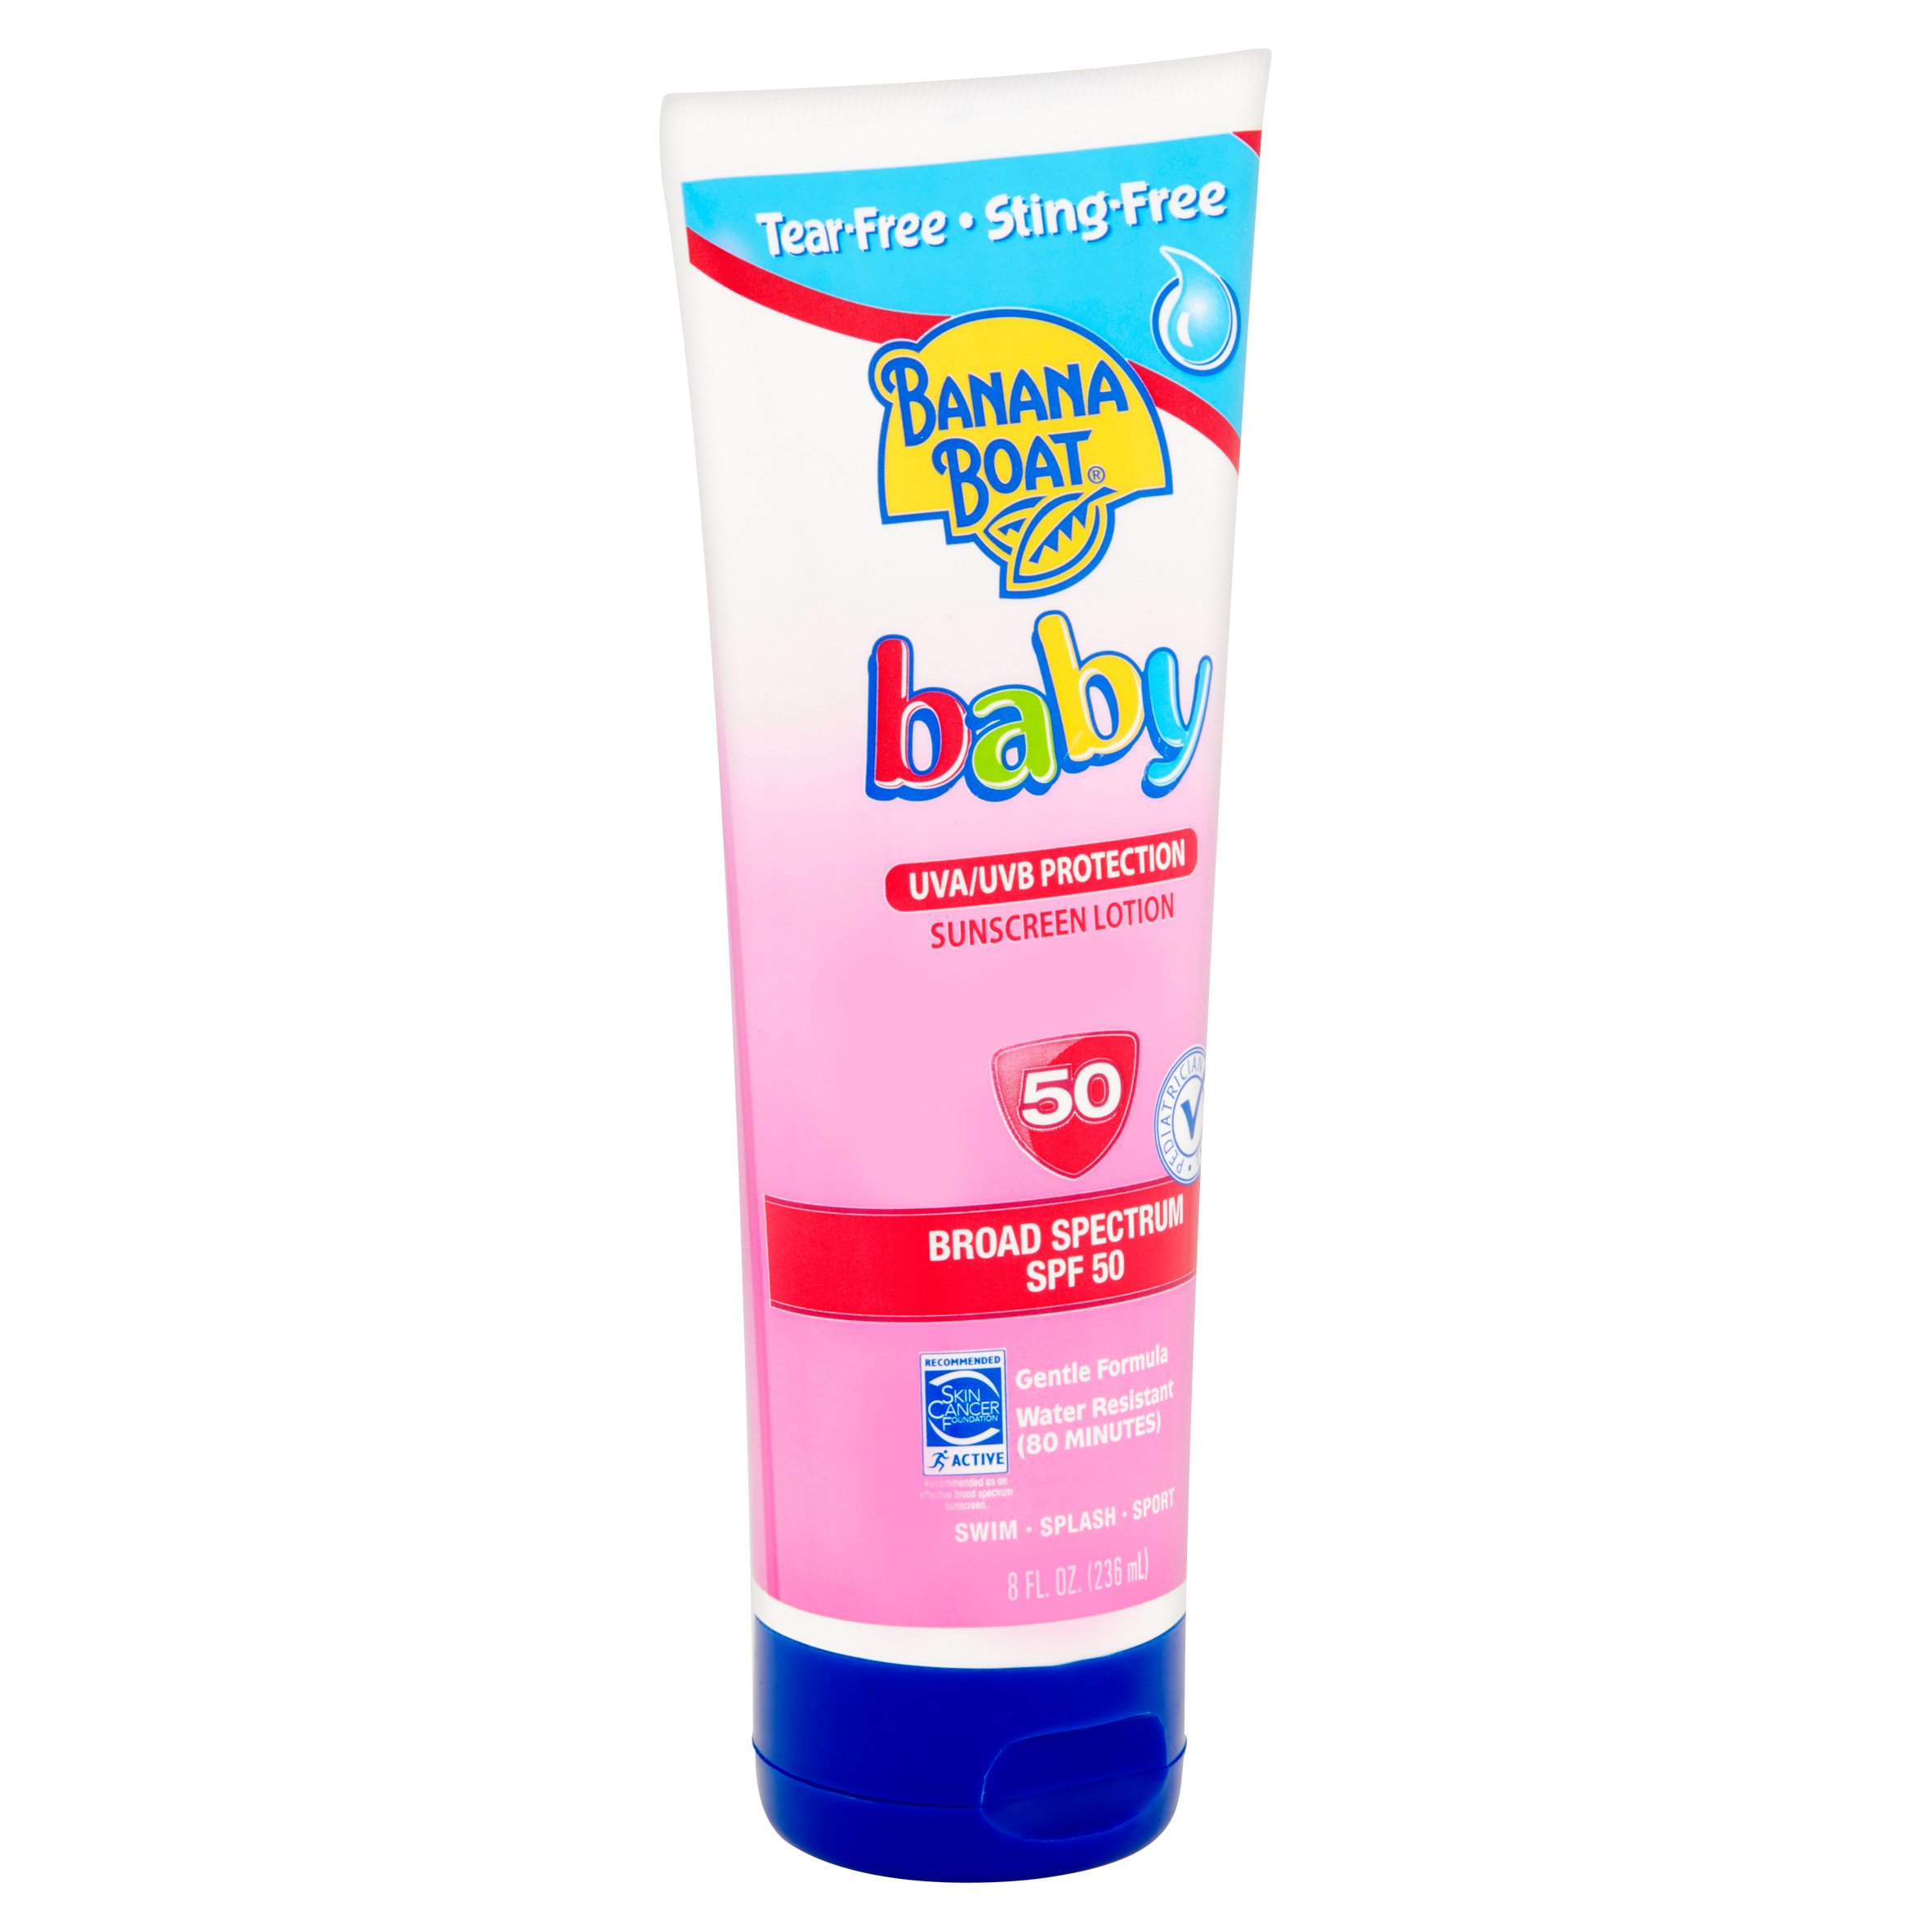 Banana Boat Baby Tear-Free Sting-Free Sunscreen Broad Spectrum Lotion SPF 50, 8 Oz - image 2 of 5